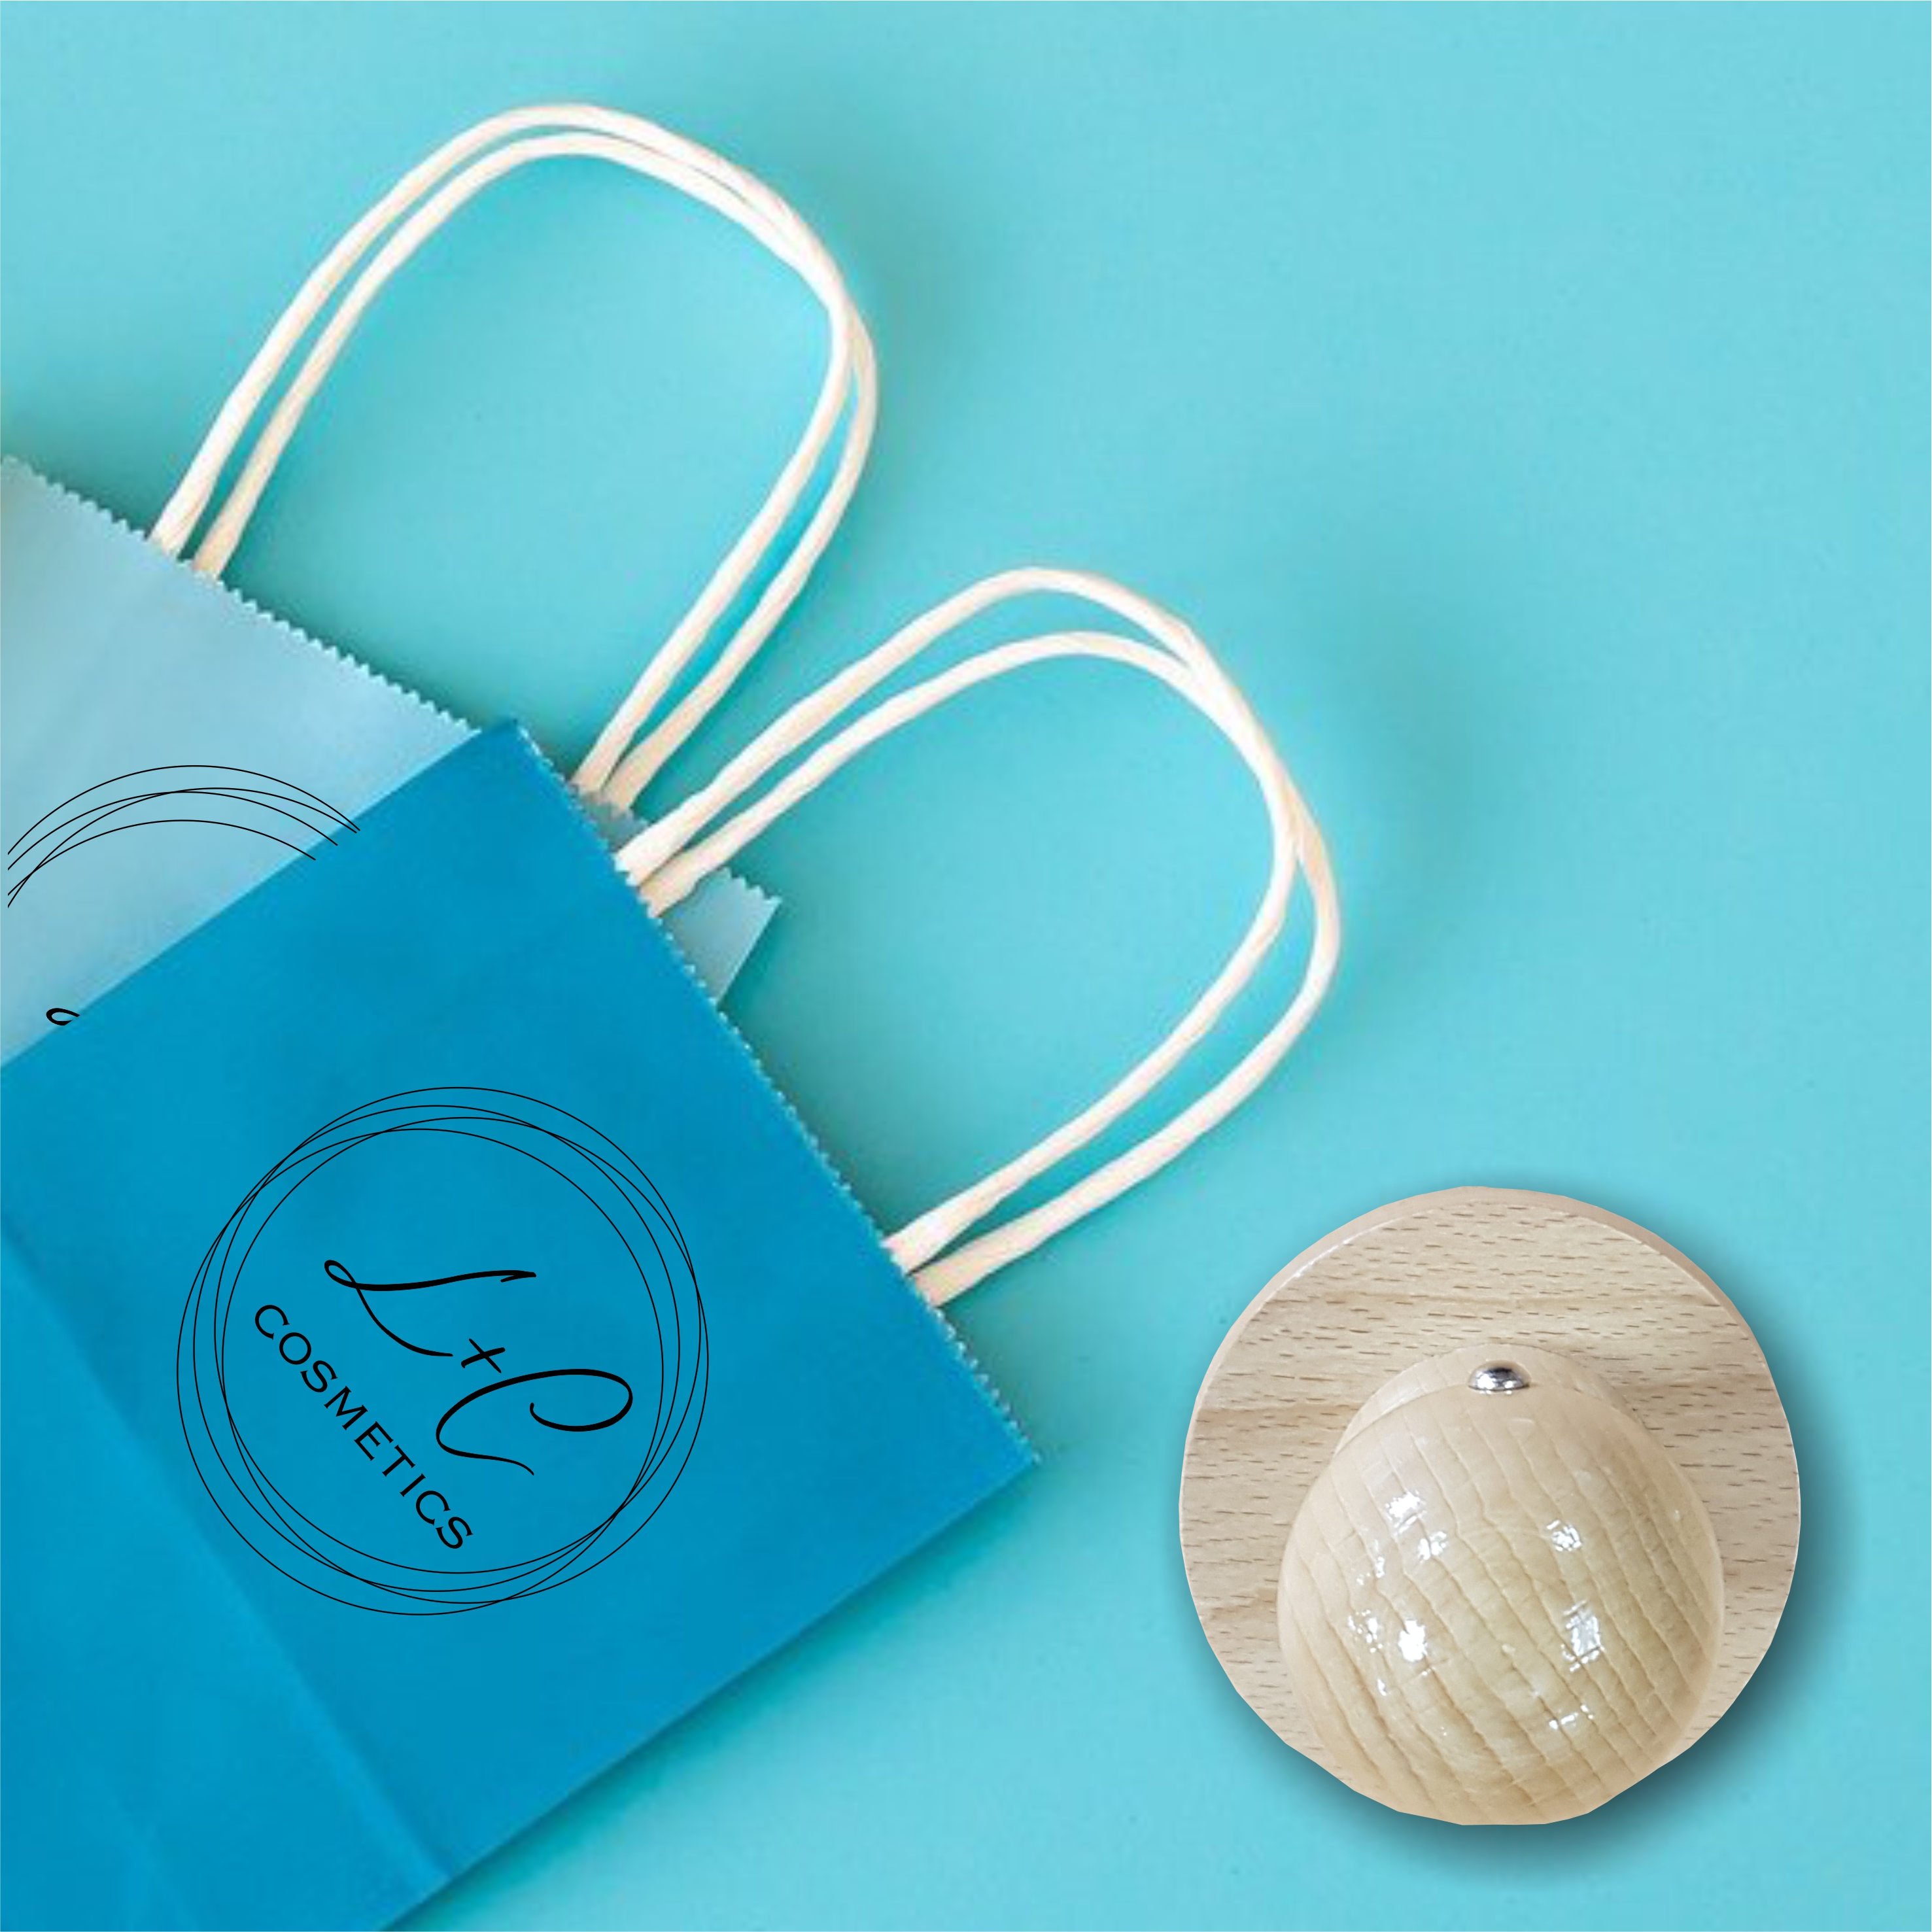 Wooden rubber stamp used to print logo onto paper bags